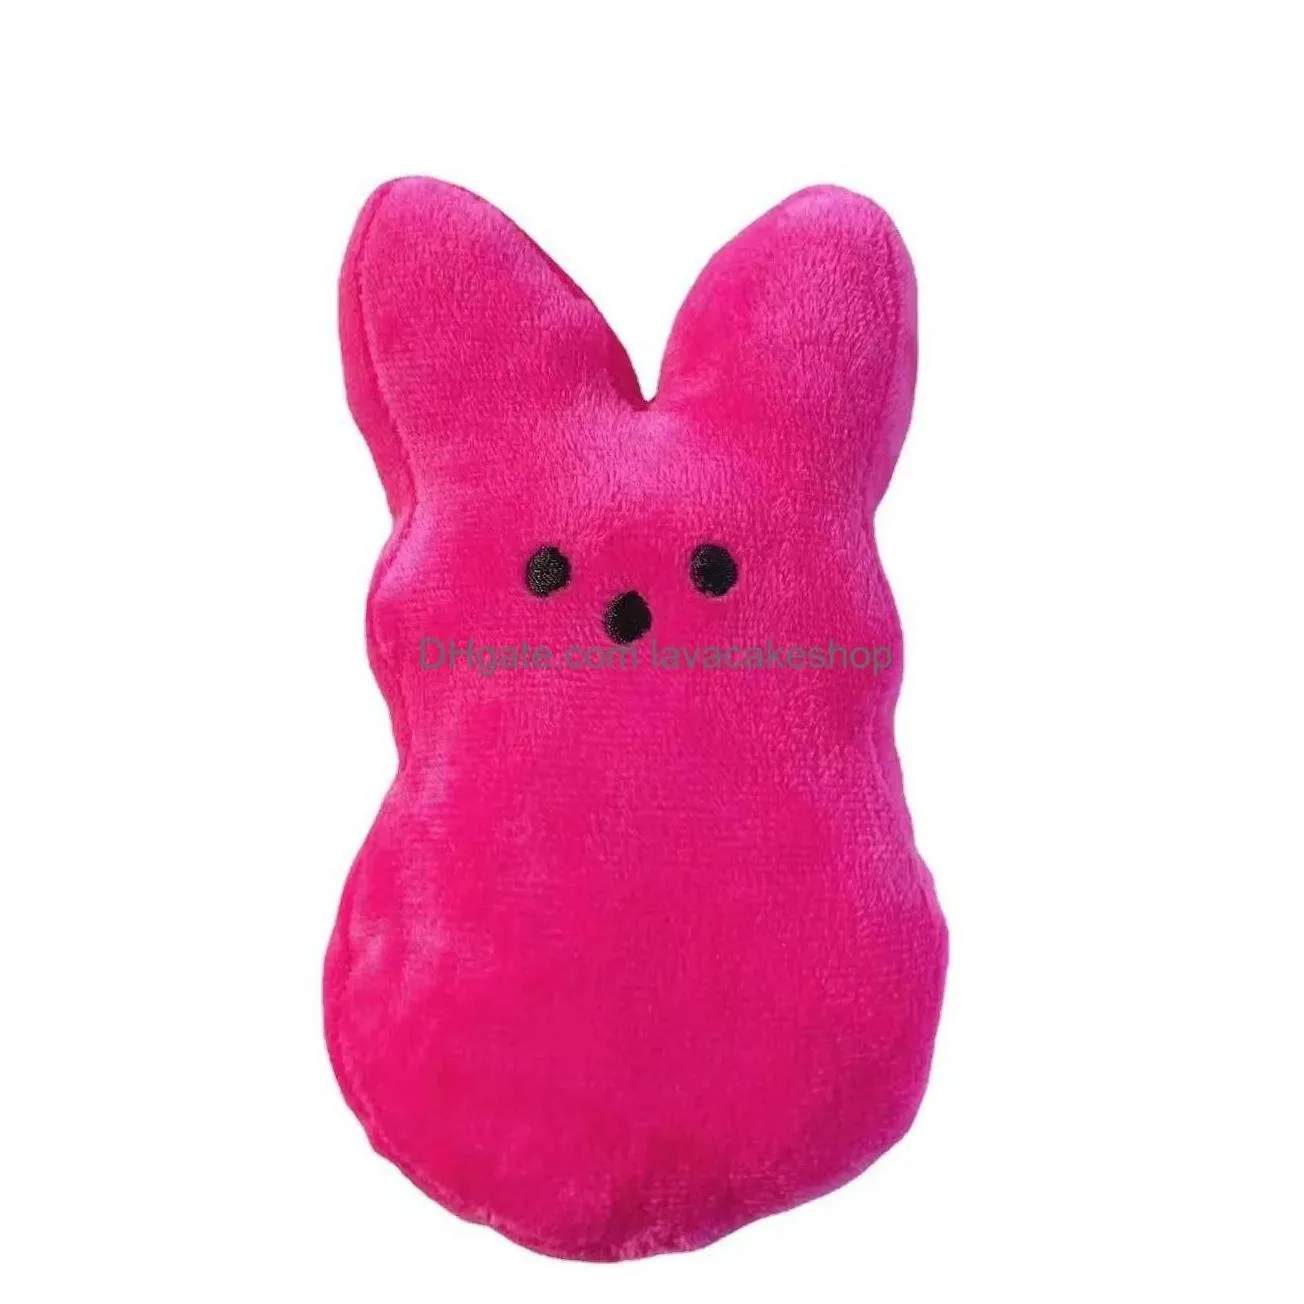 Other Festive Party Supplies 15Cm Mini Easter Bunny Peeps Plush Doll Pink Blue Yellow Purple Rabbit Dolls For Childrend Cute Soft Toys